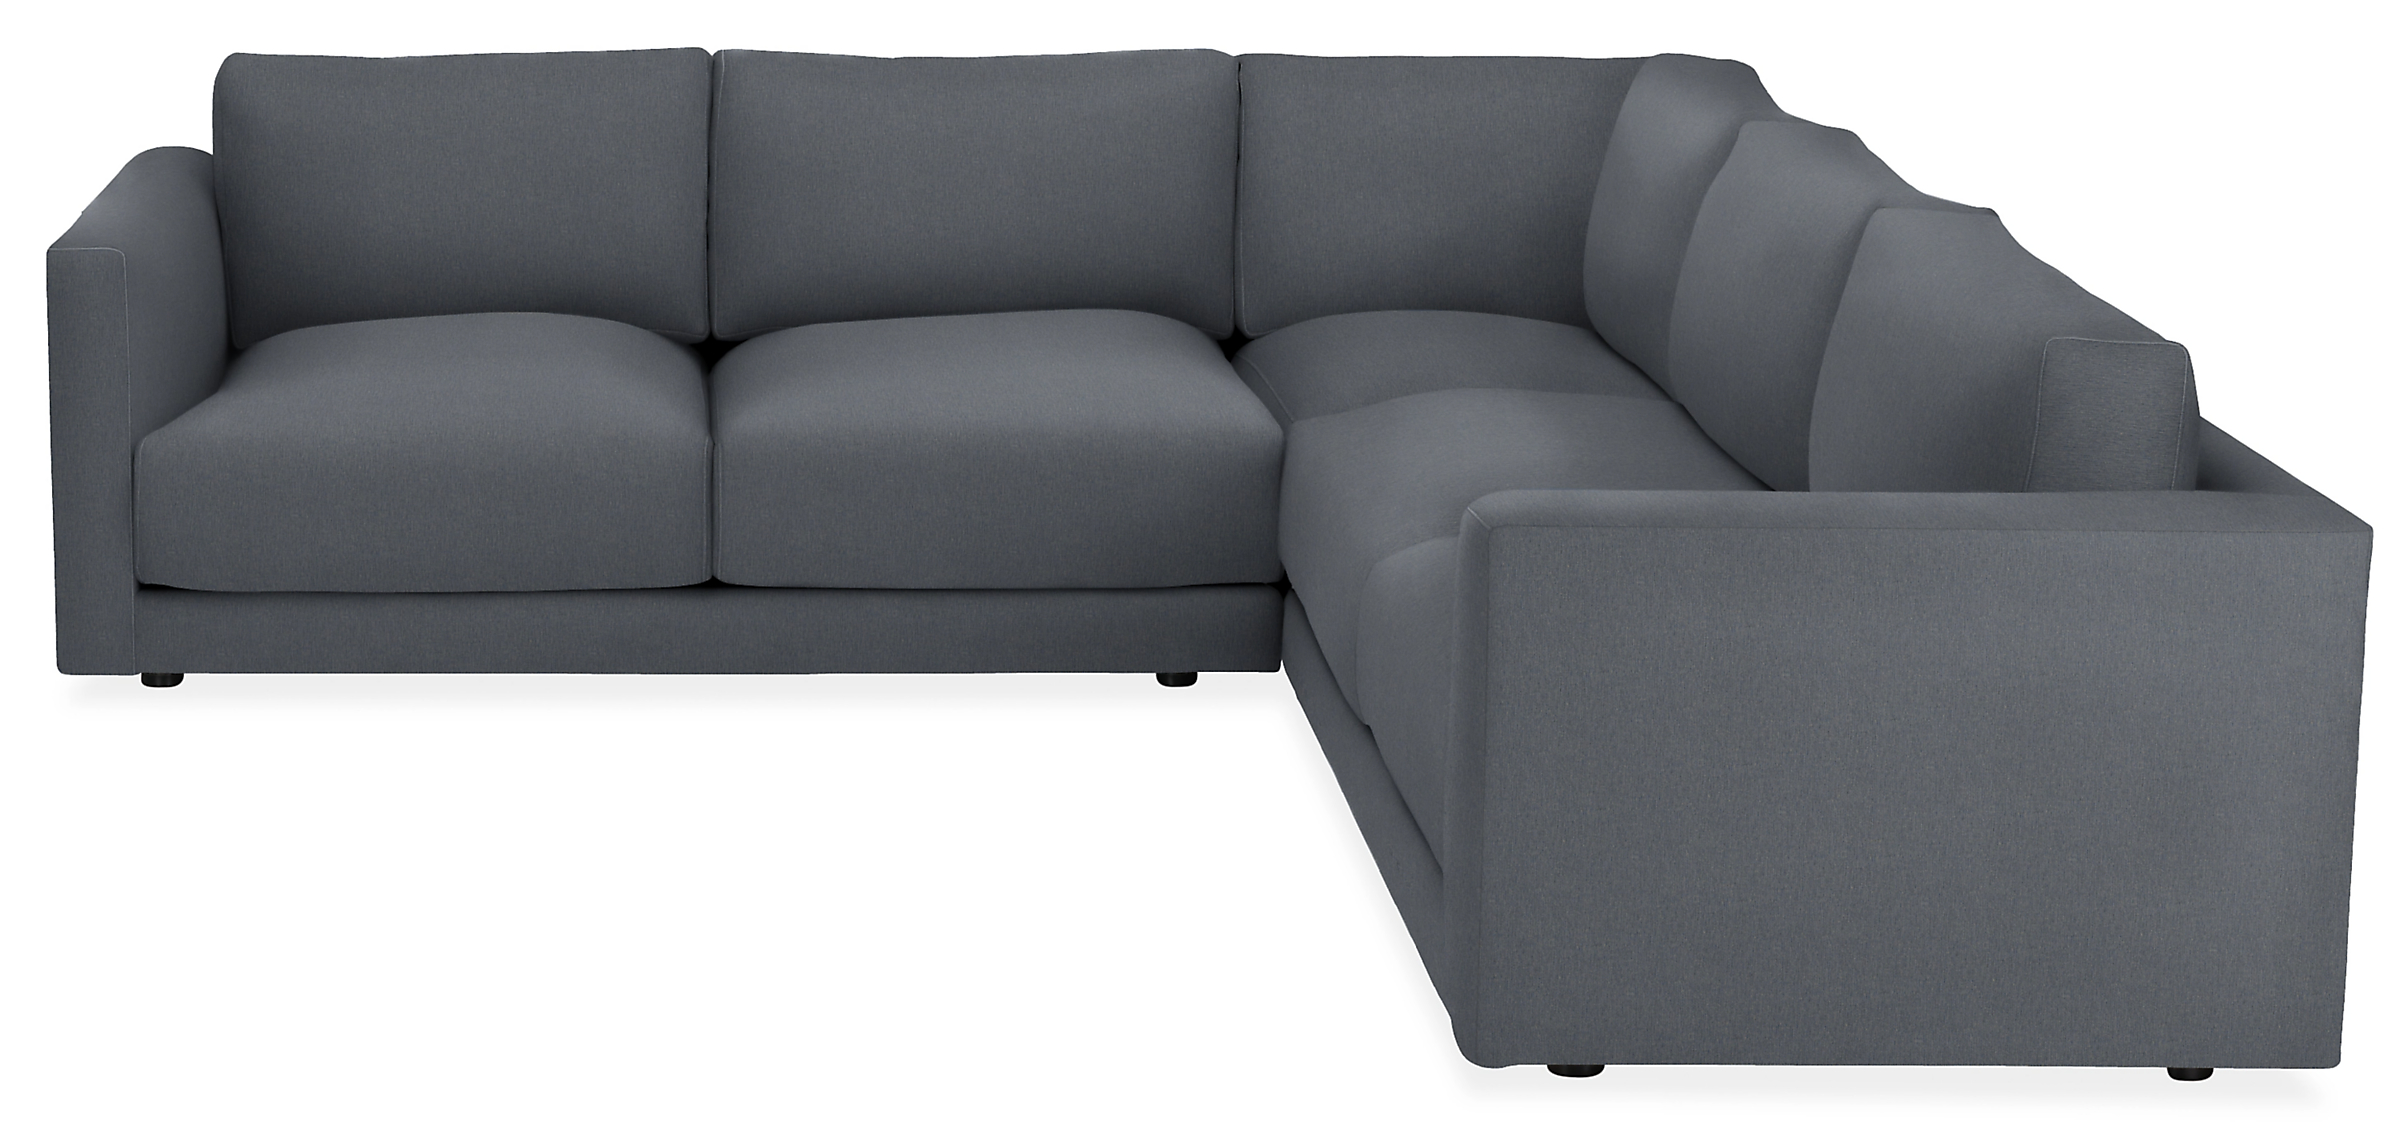 Clemens 104x104" Three-Piece Sectional in Hines Cadet